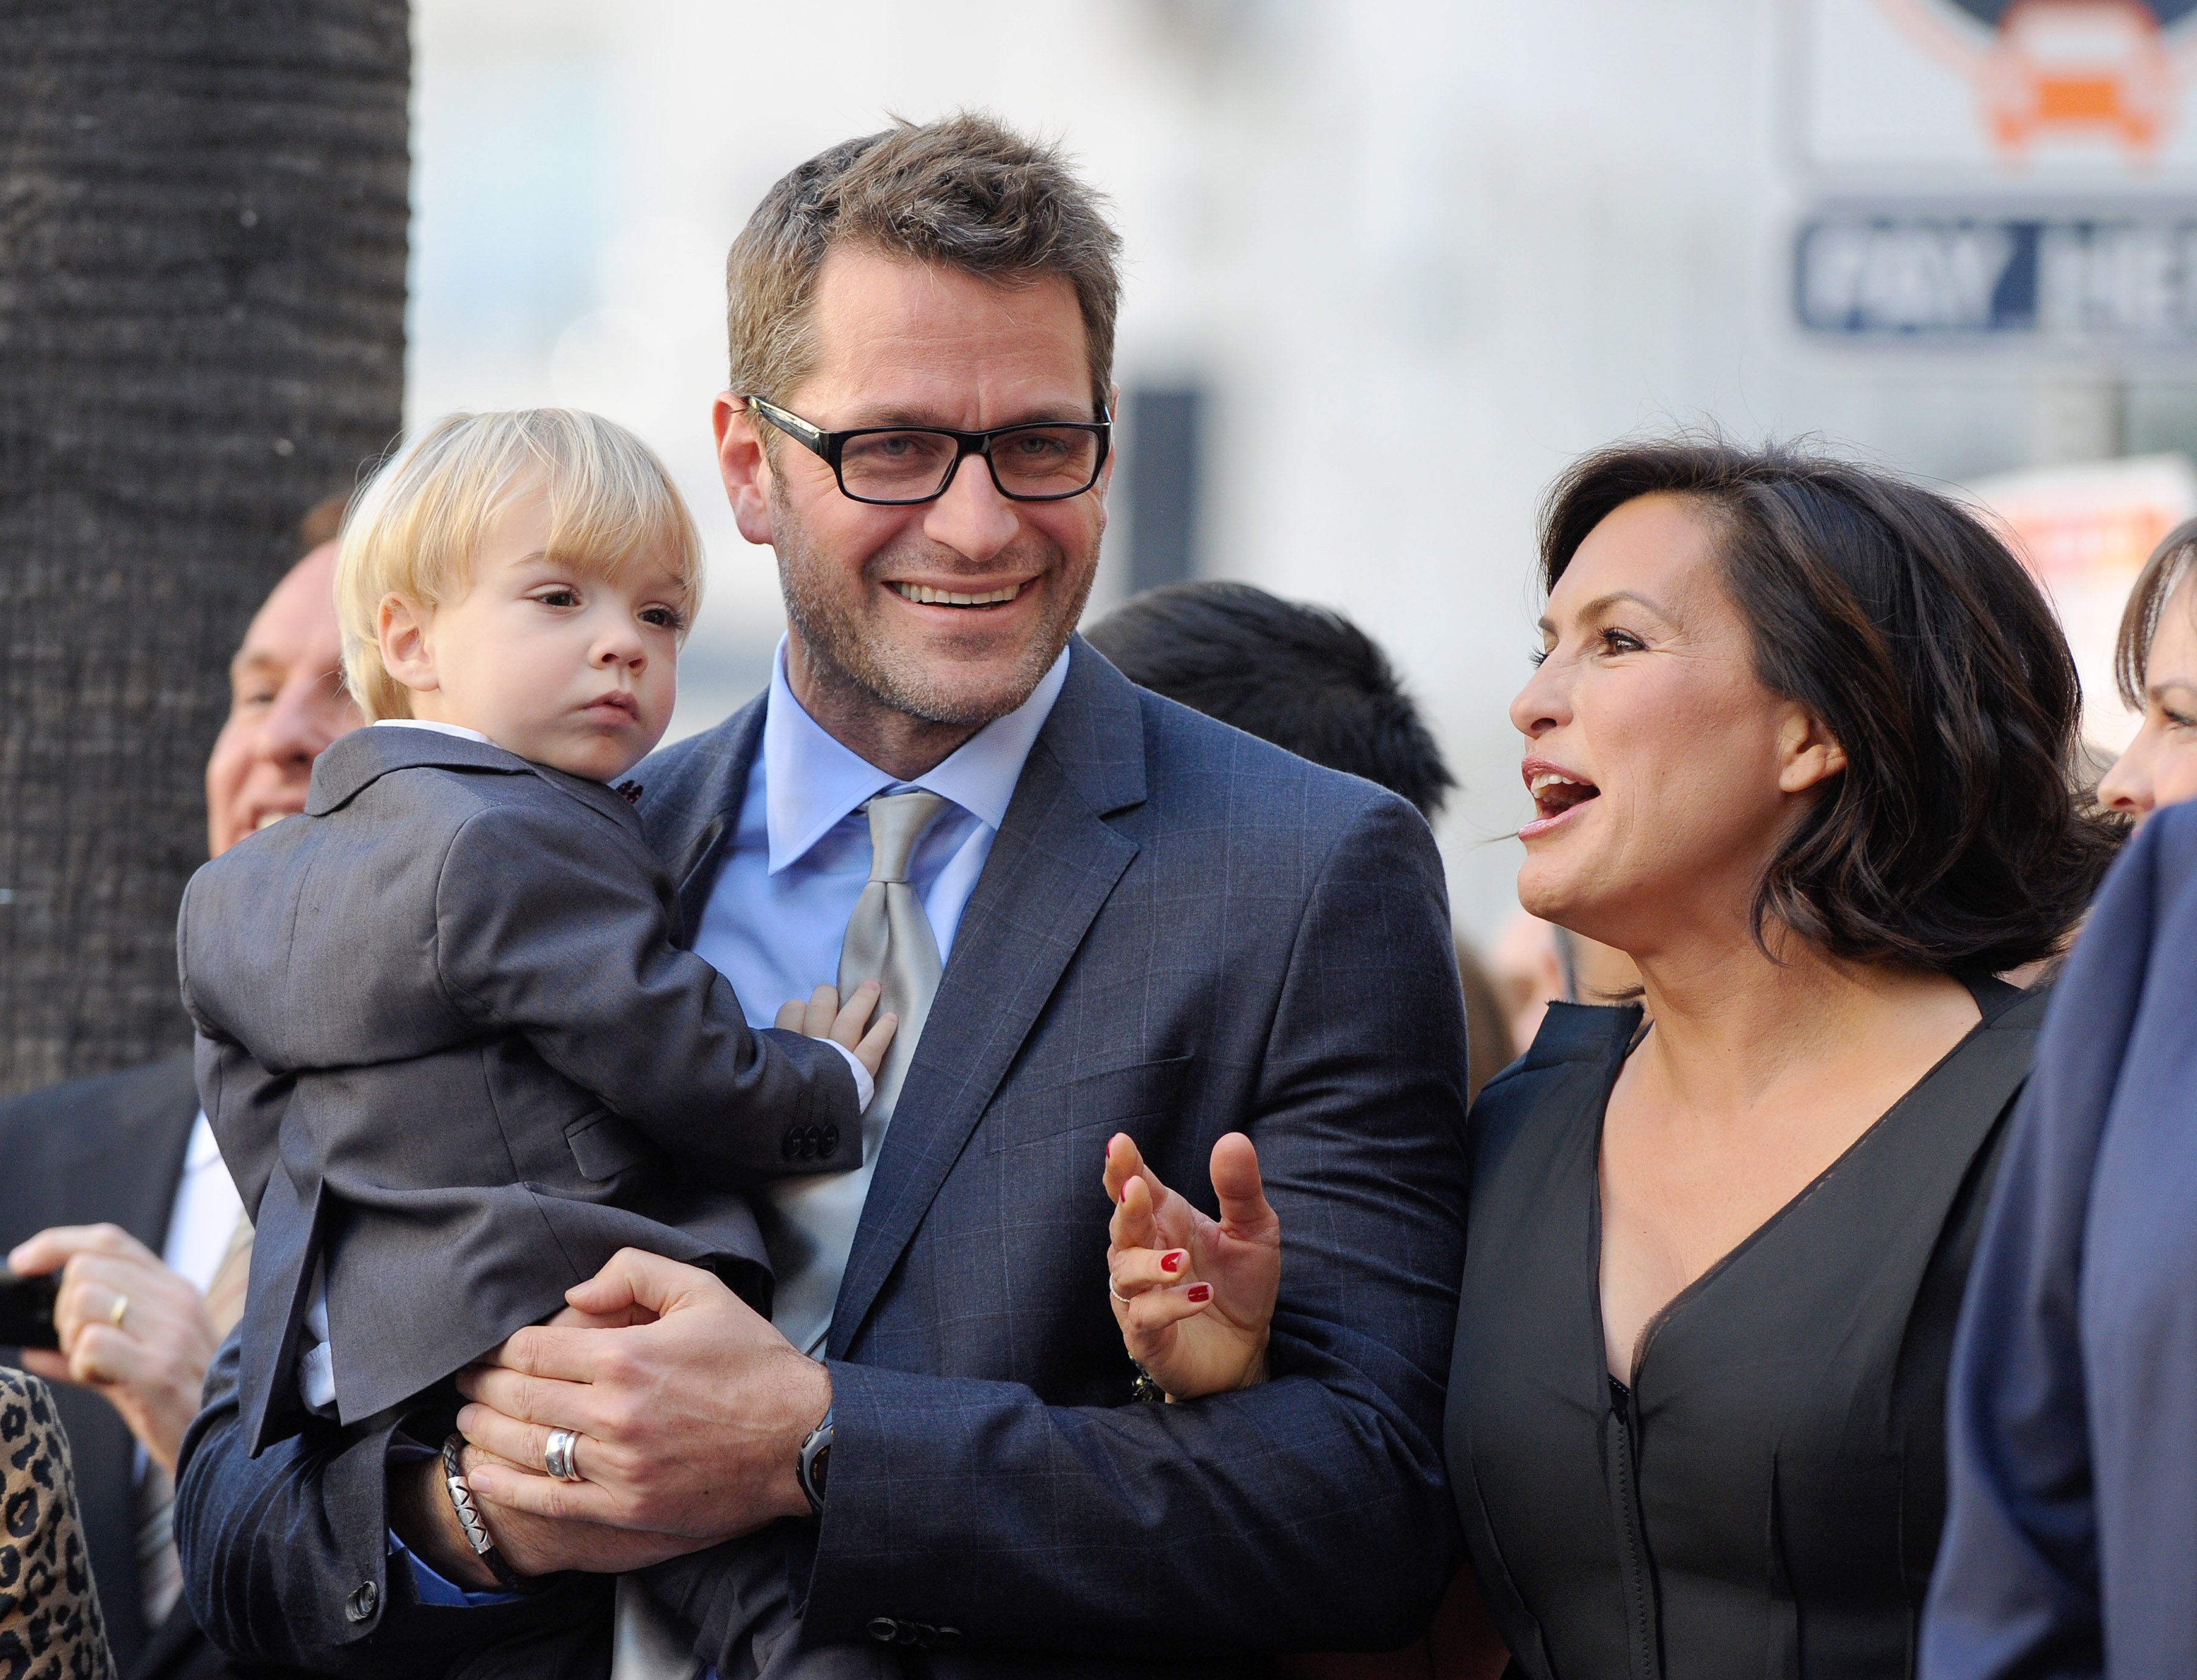 Mariska Hargitay and Peter Hermann with son Andrew attend the ceremony honoring Mariska Hargitay with a Star on The Hollywood Walk of Fame on November 8, 2013, in Hollywood | Source: Getty Images